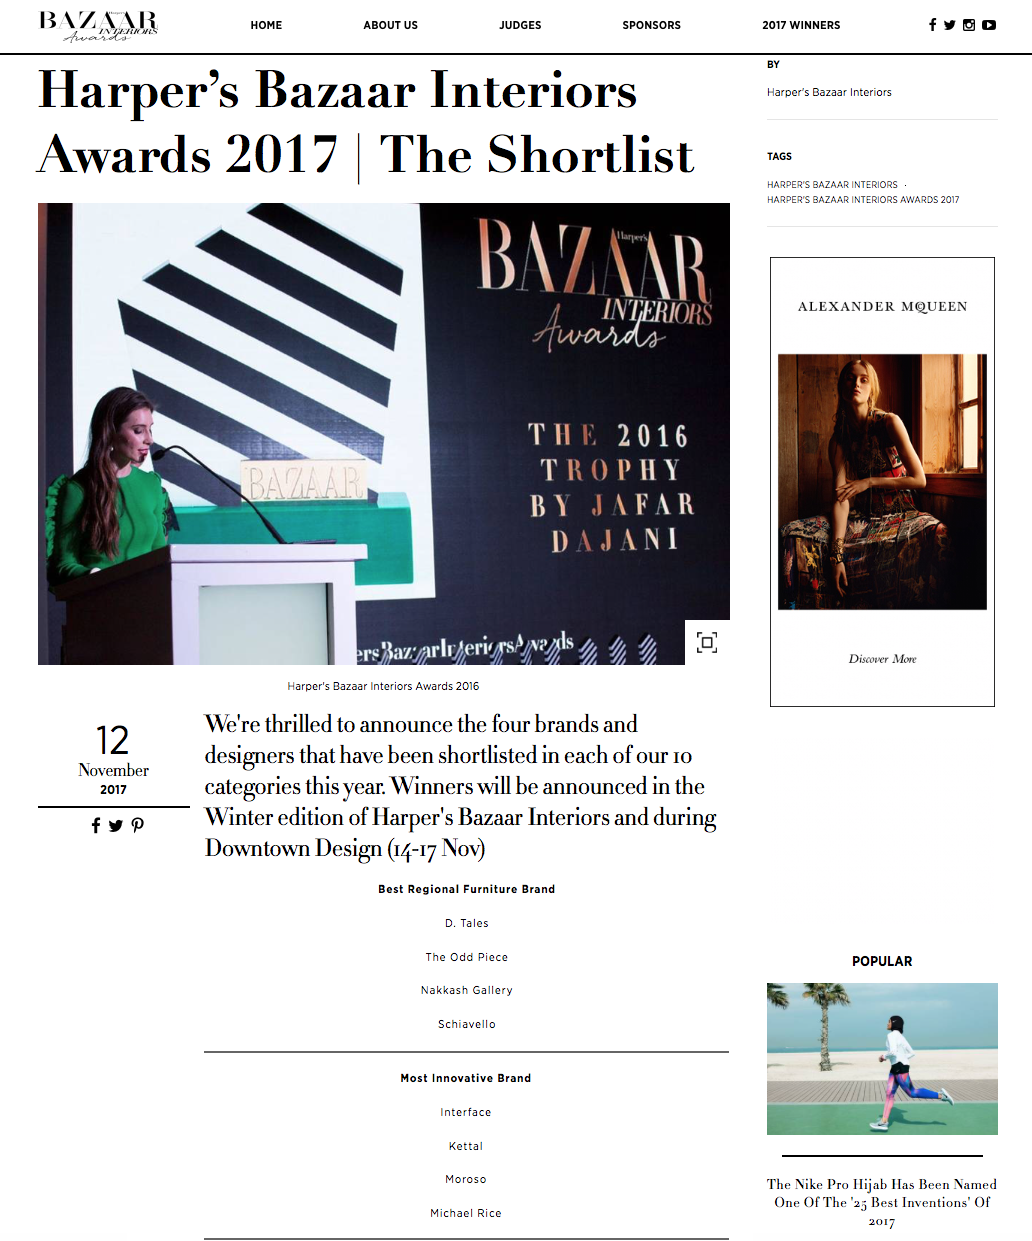  Thrilled to have been shortlisted by @harpersbazzarinteriors as one of the Most Innovative Brand Nominees 2017 